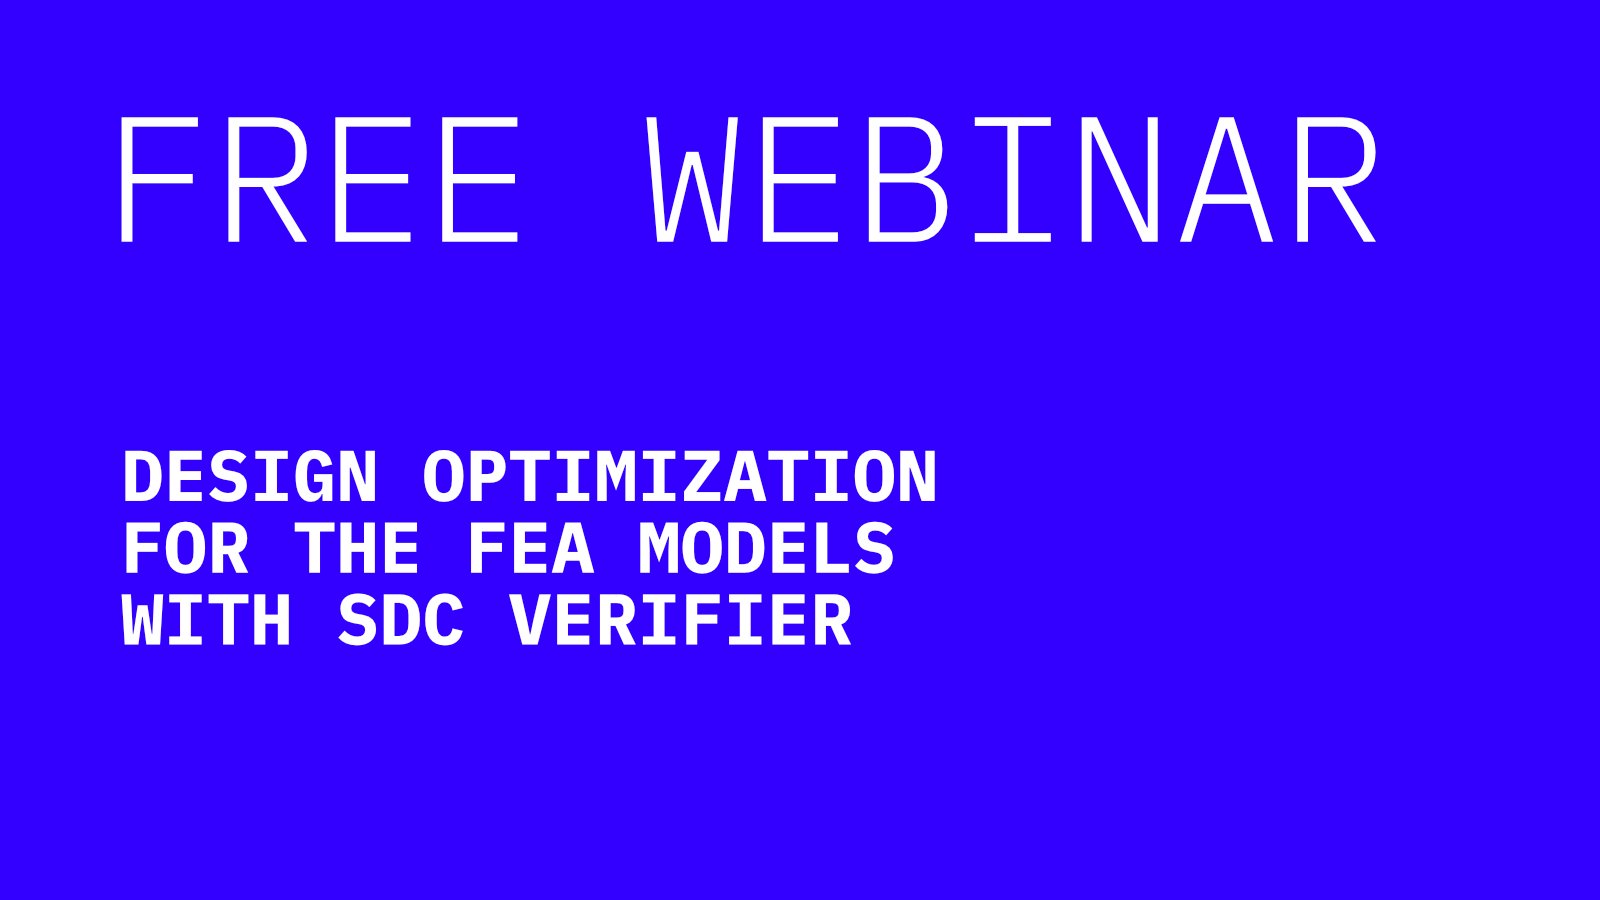 Design Optimization for the FEA Models with SDC Verifier